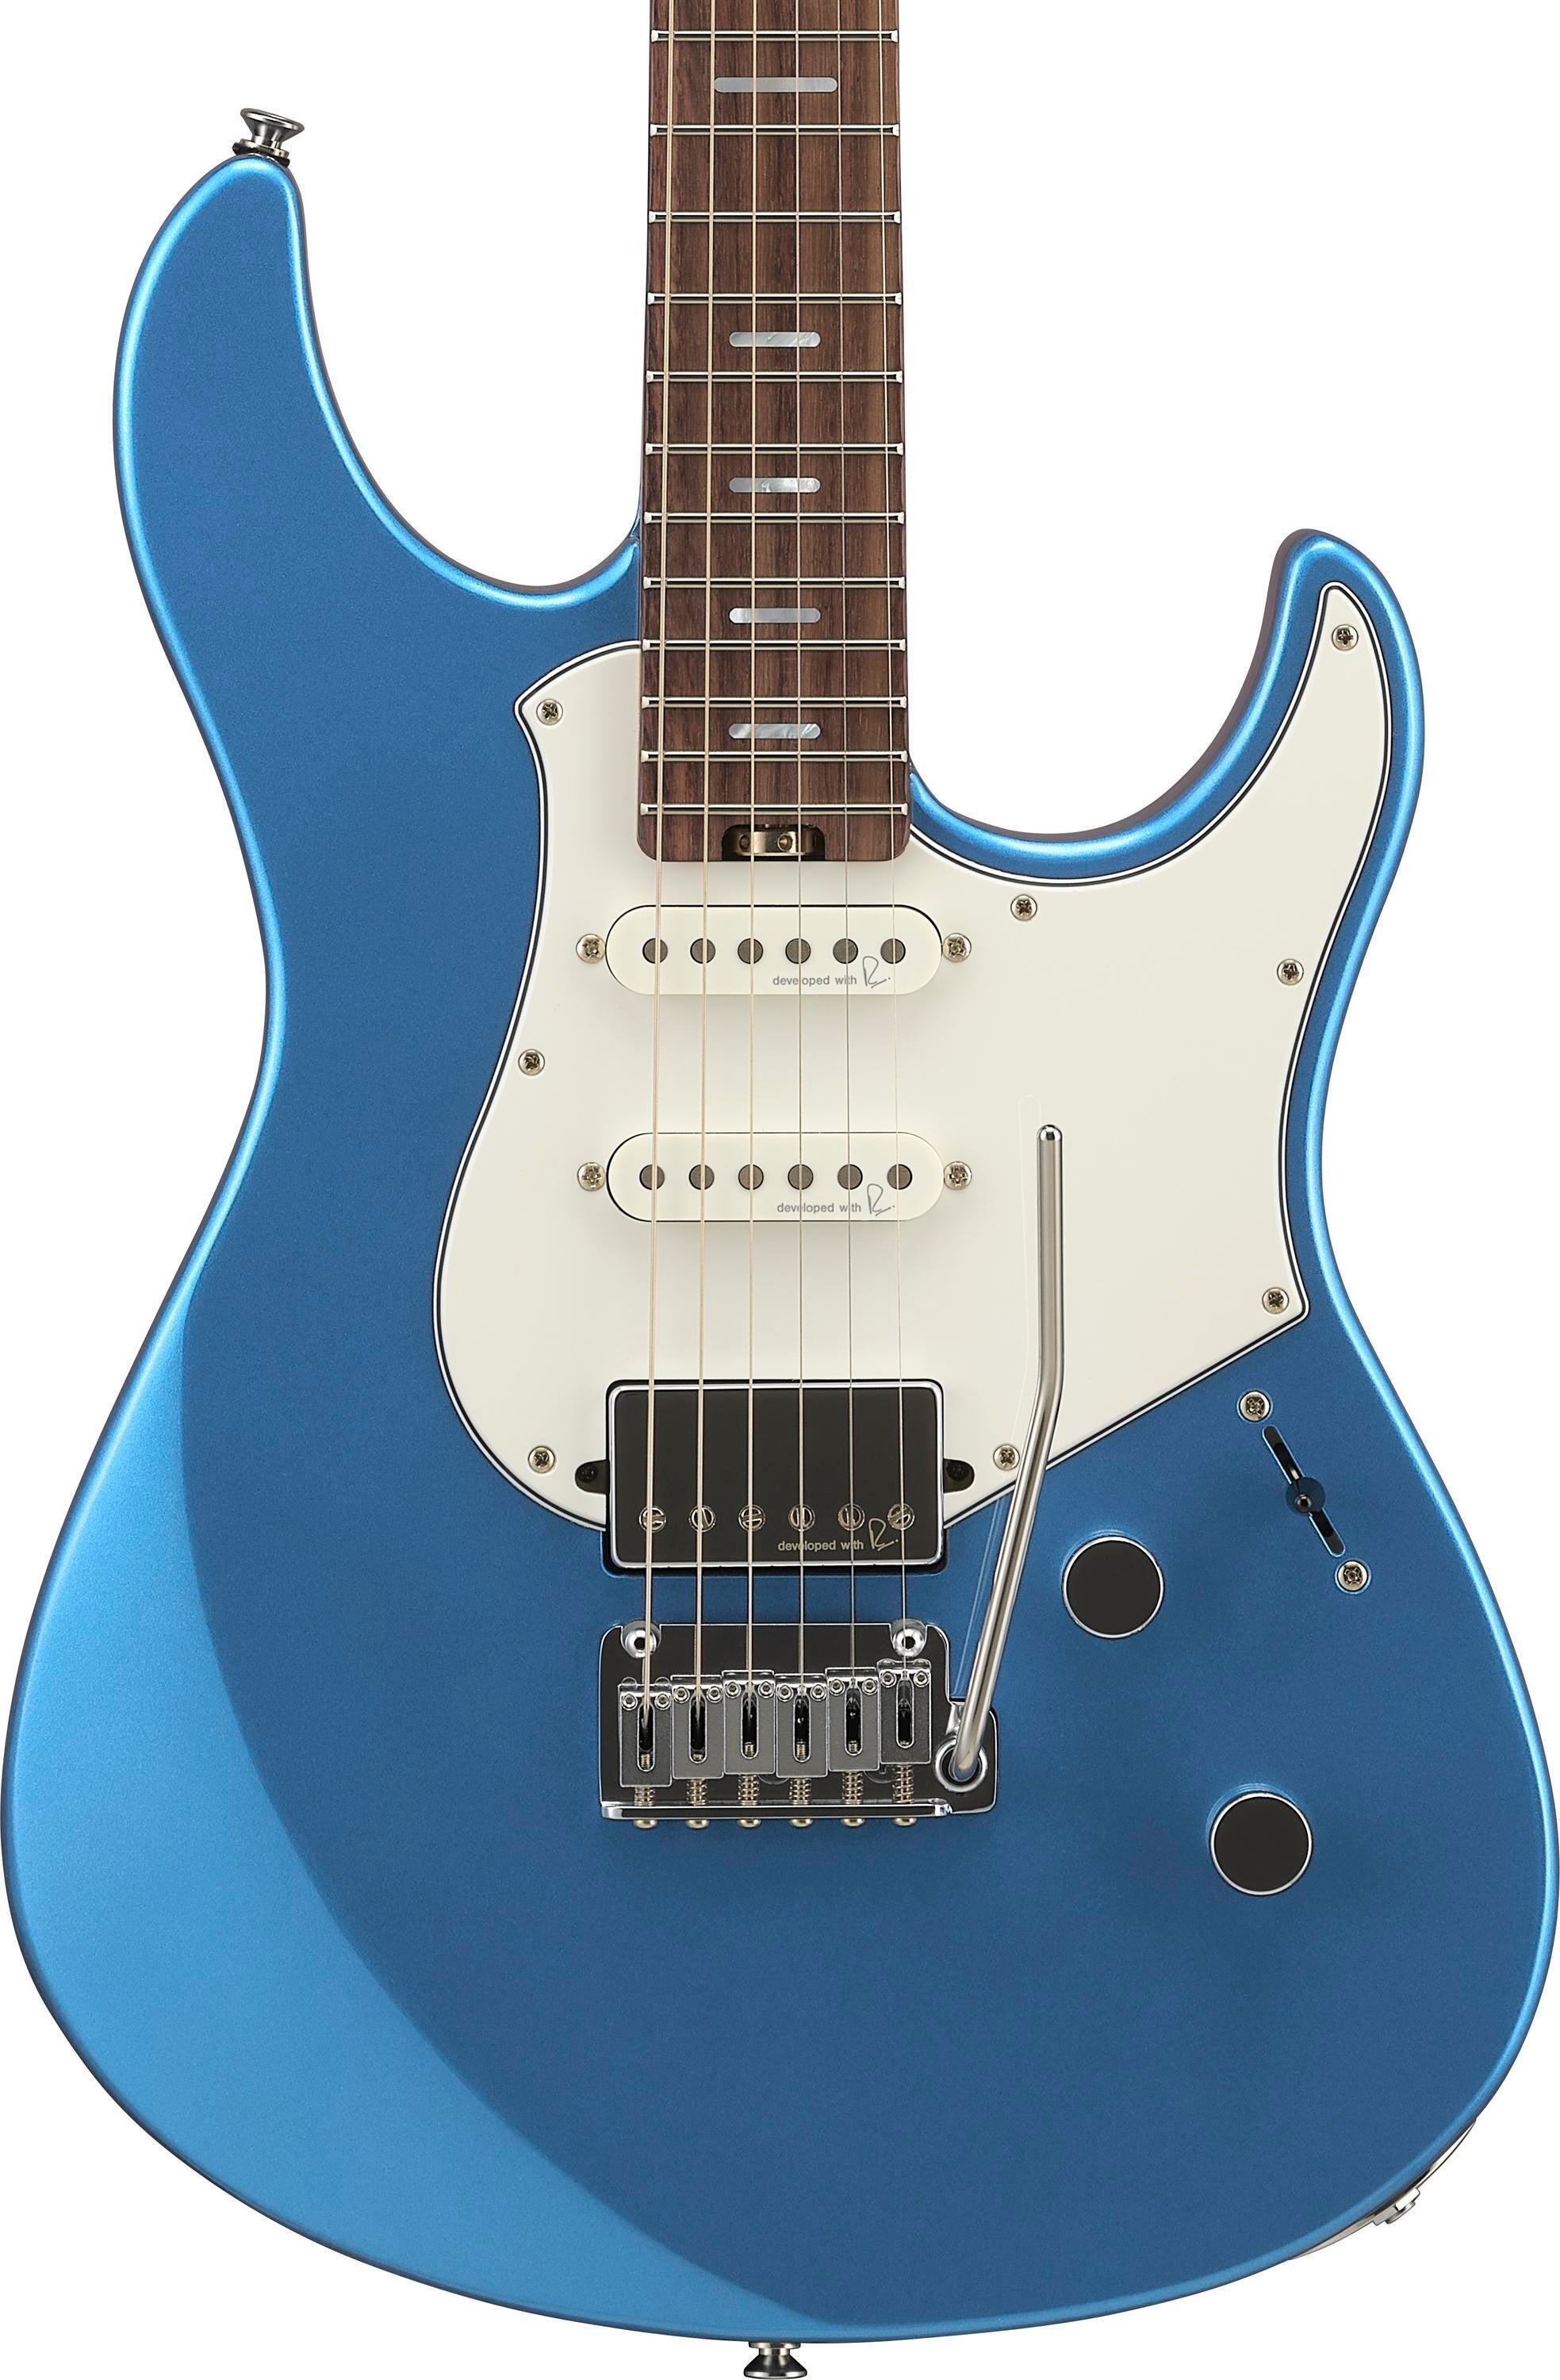 Yamaha PACS+12 Pacifica Standard Plus Electric Guitar, Rosewood Fingerboard - Sparkle Blue | Zoso Music Sdn Bhd